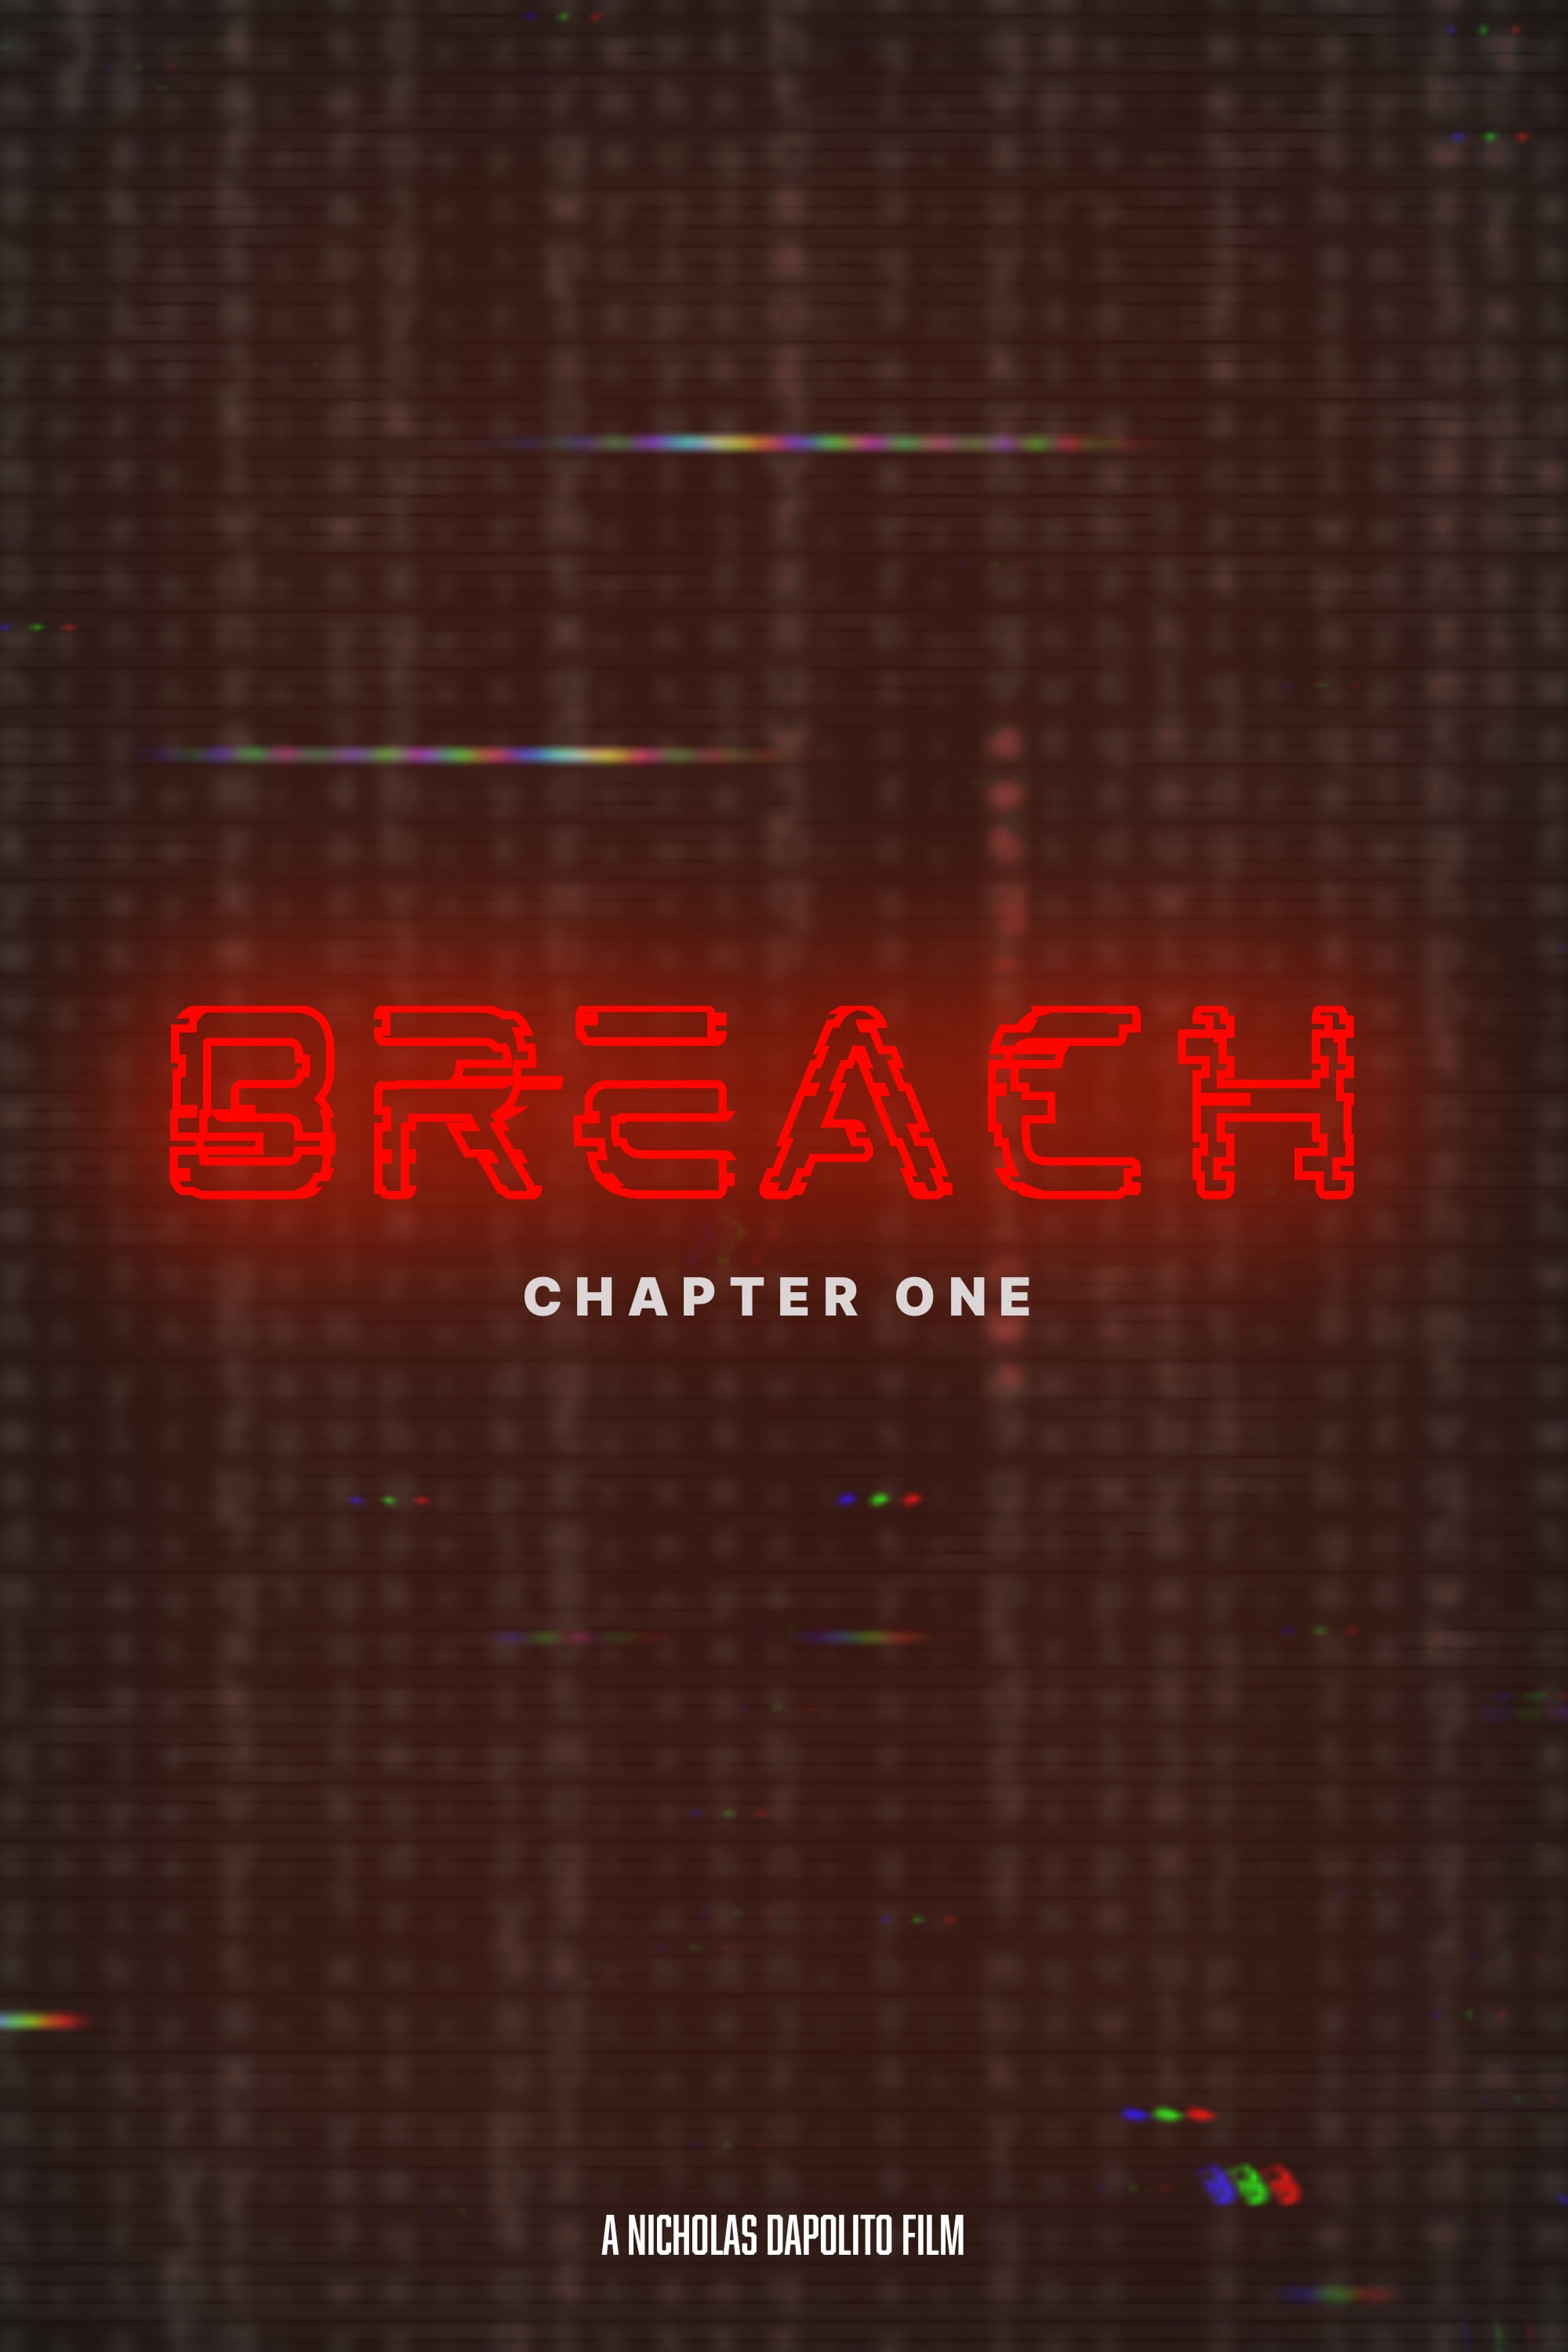 Breach - Chapter One